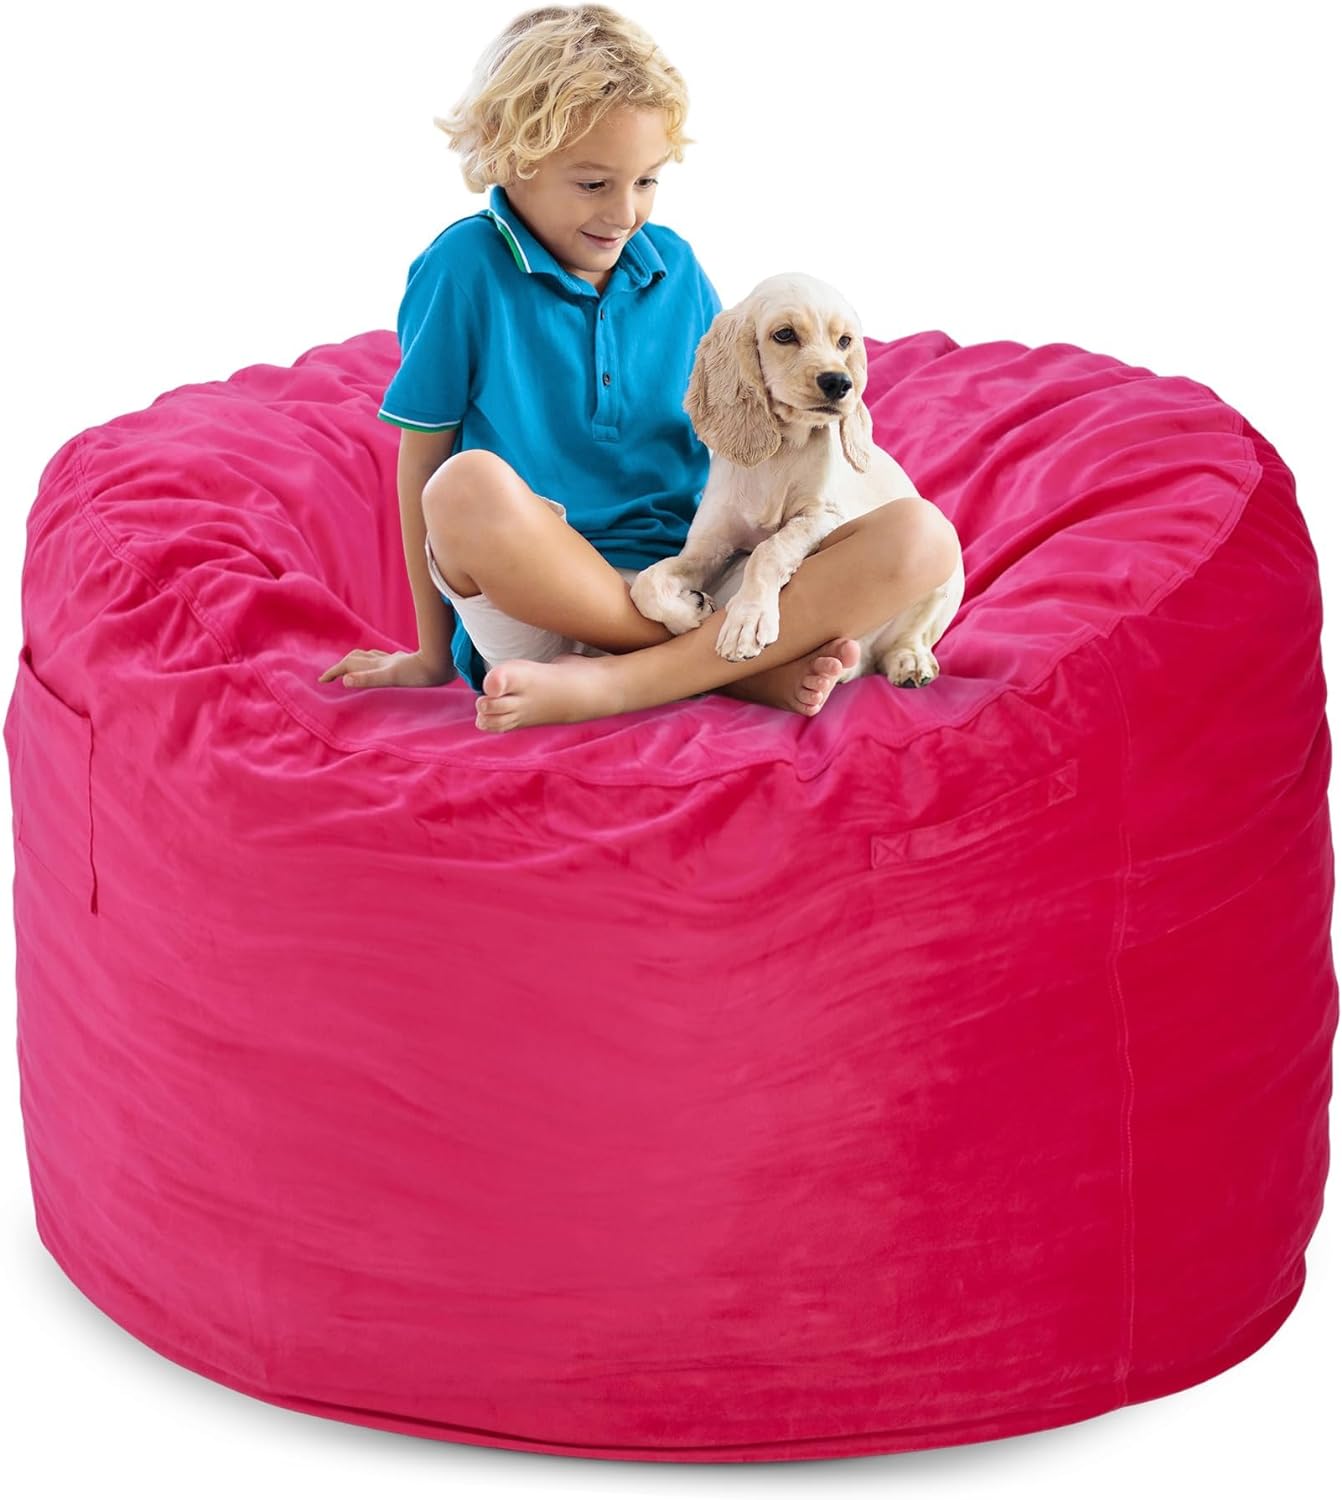 Homguava Bean Bag Chair 3' Bean Bags with Memory Foam Filled, Large Beanbag Chairs Soft Sofa with Dutch Velet Cover-36×36"×24"(Pink)